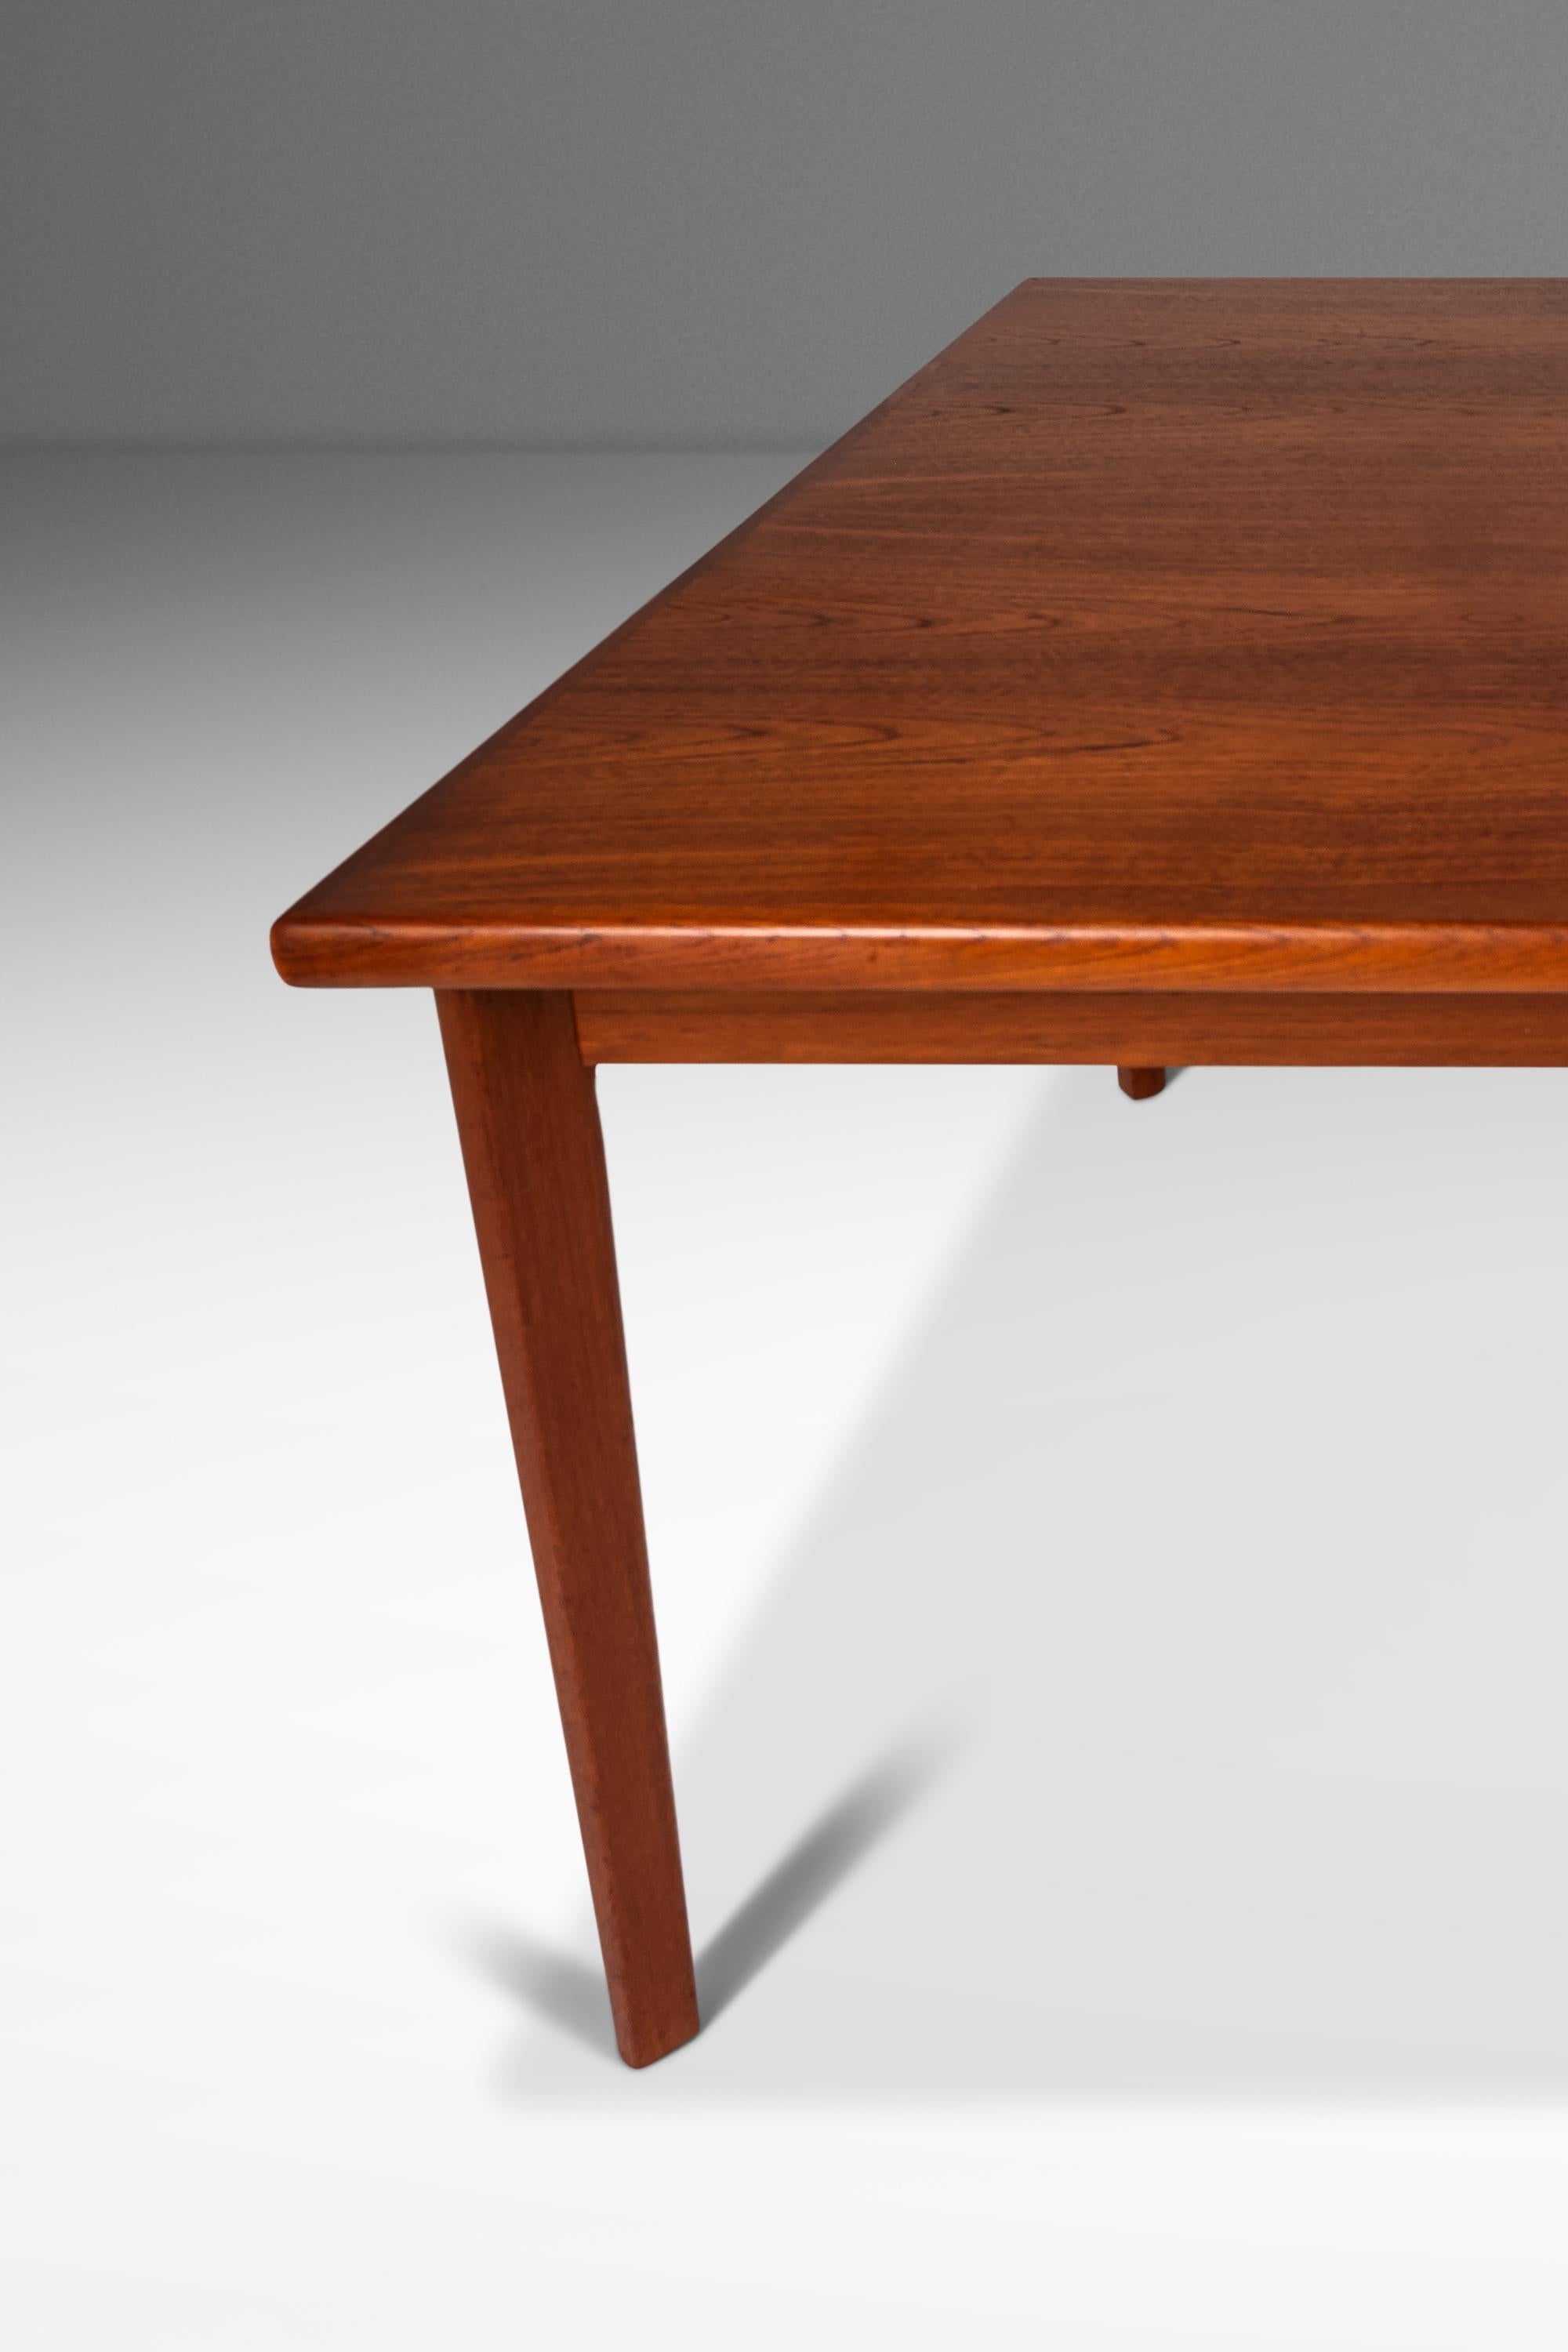 Mid-20th Century Teak Expansion Dining Table w/ Stow-in Leaves by BRDR Furbo, Denmark, c. 1960s For Sale